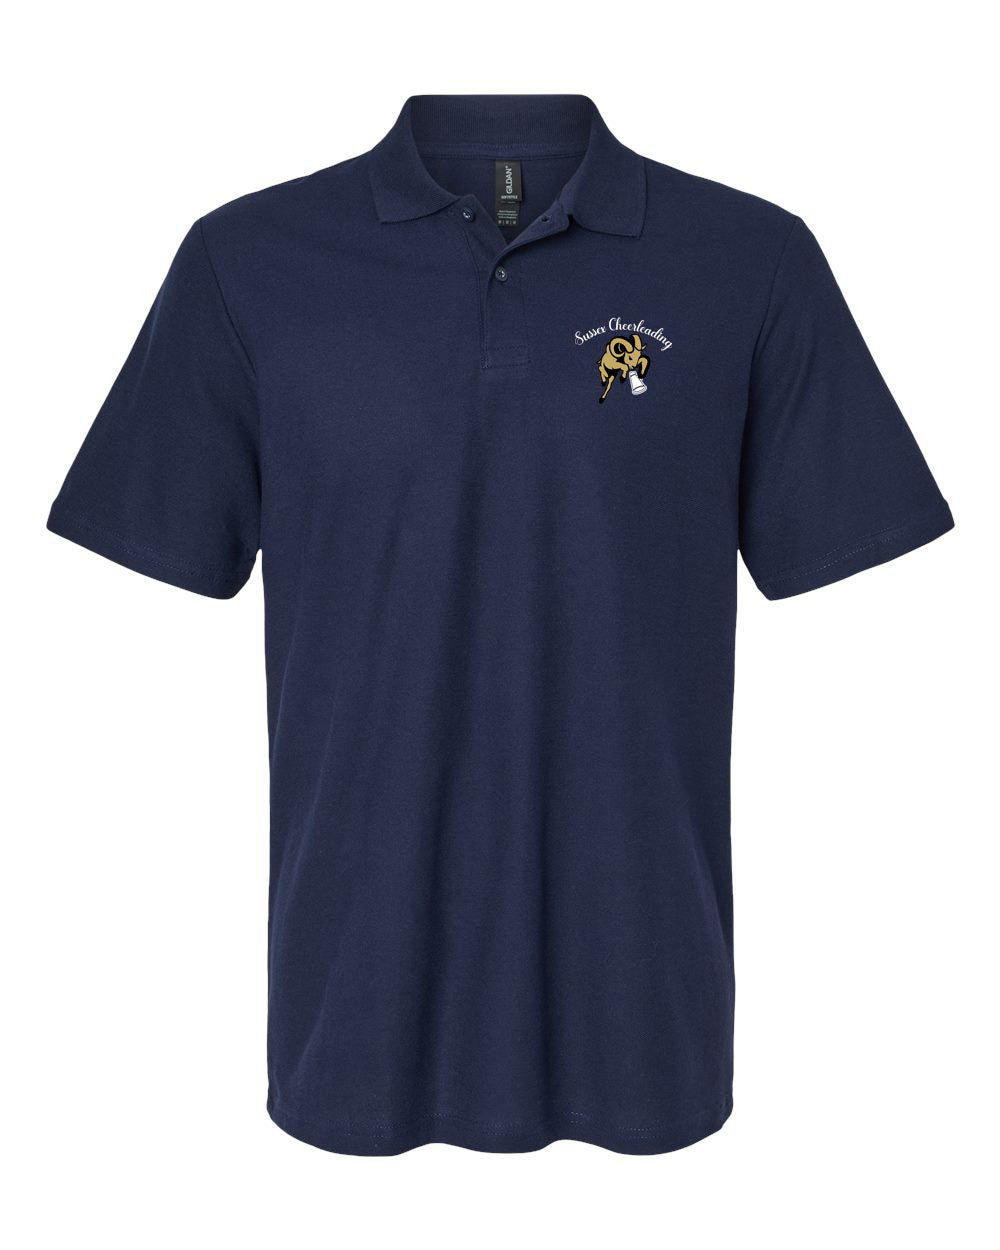 Sussex Middle Cheer Polo T-Shirt Design 3